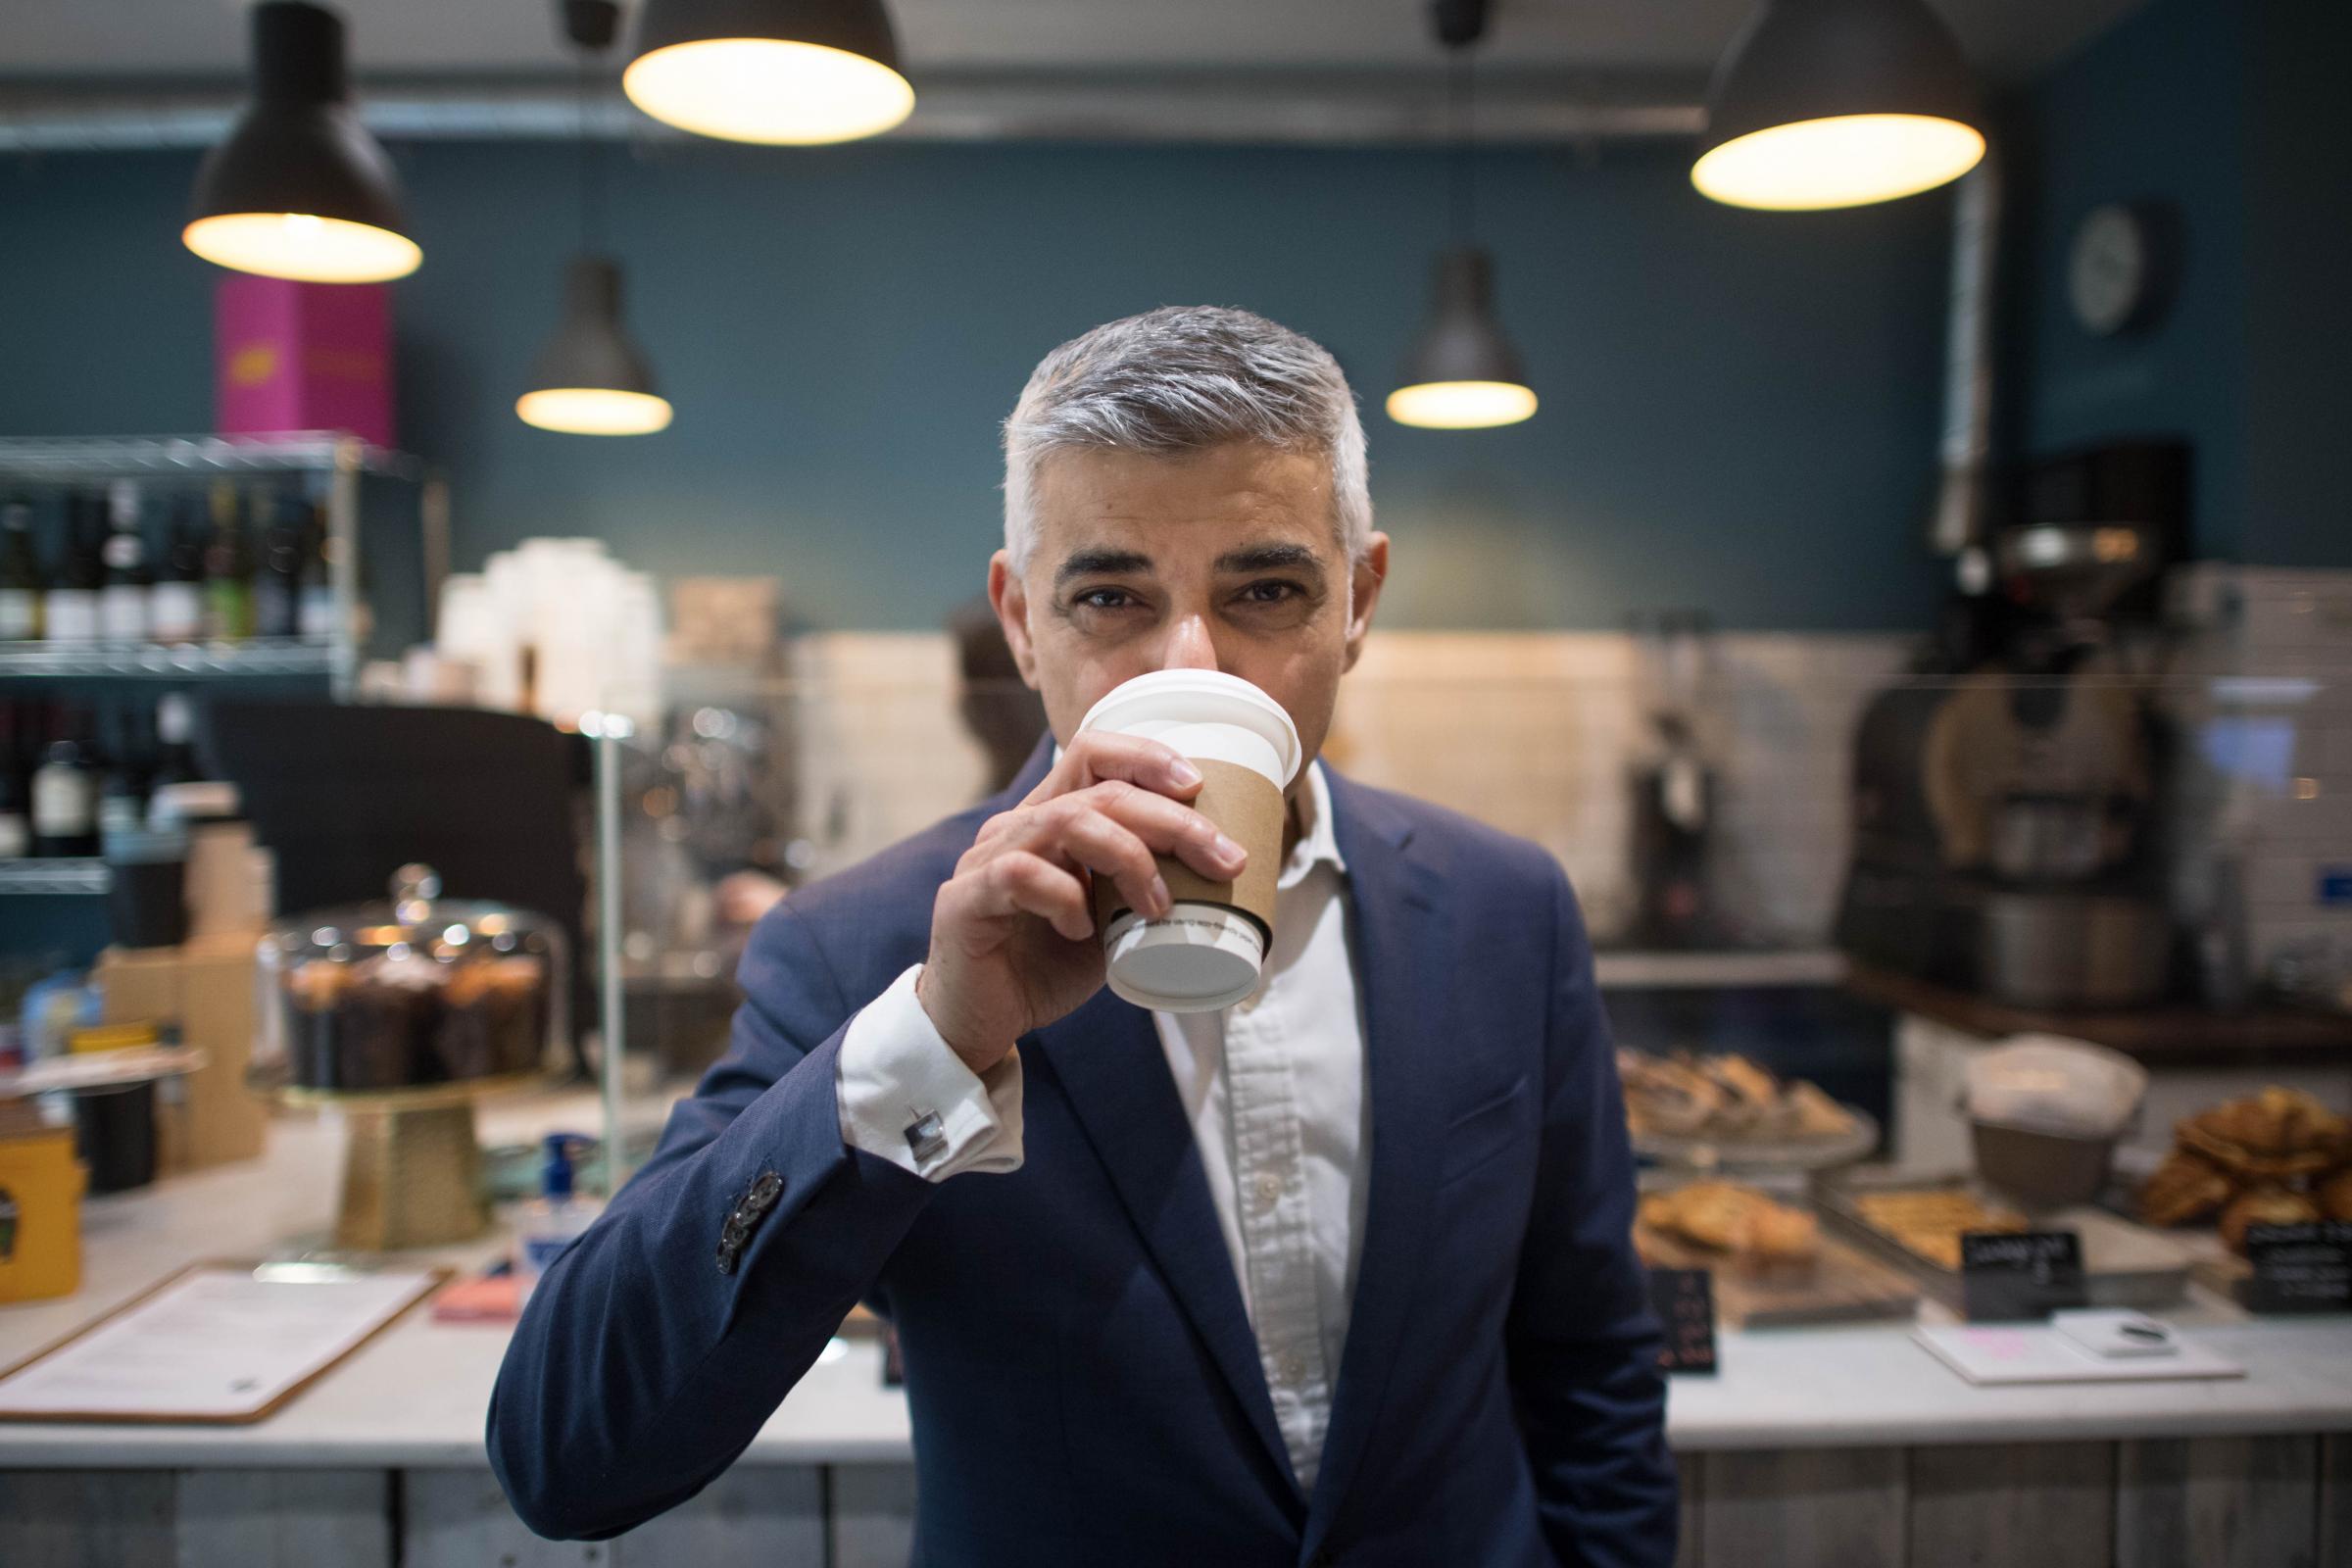 Mayor of London Sadiq Khan drinks a cup of coffee at his campaign launch. Photo: PA